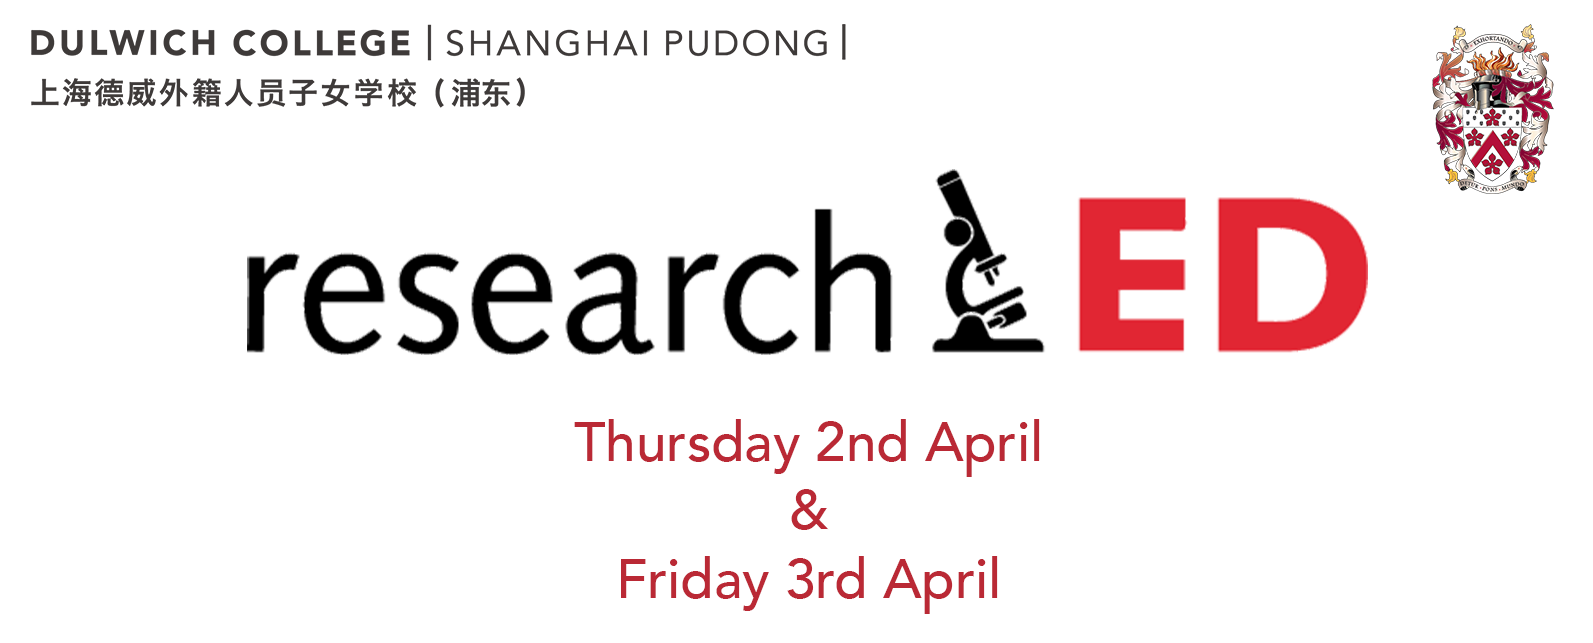 Researched Conference at Dulwich College Shanghai Pudong